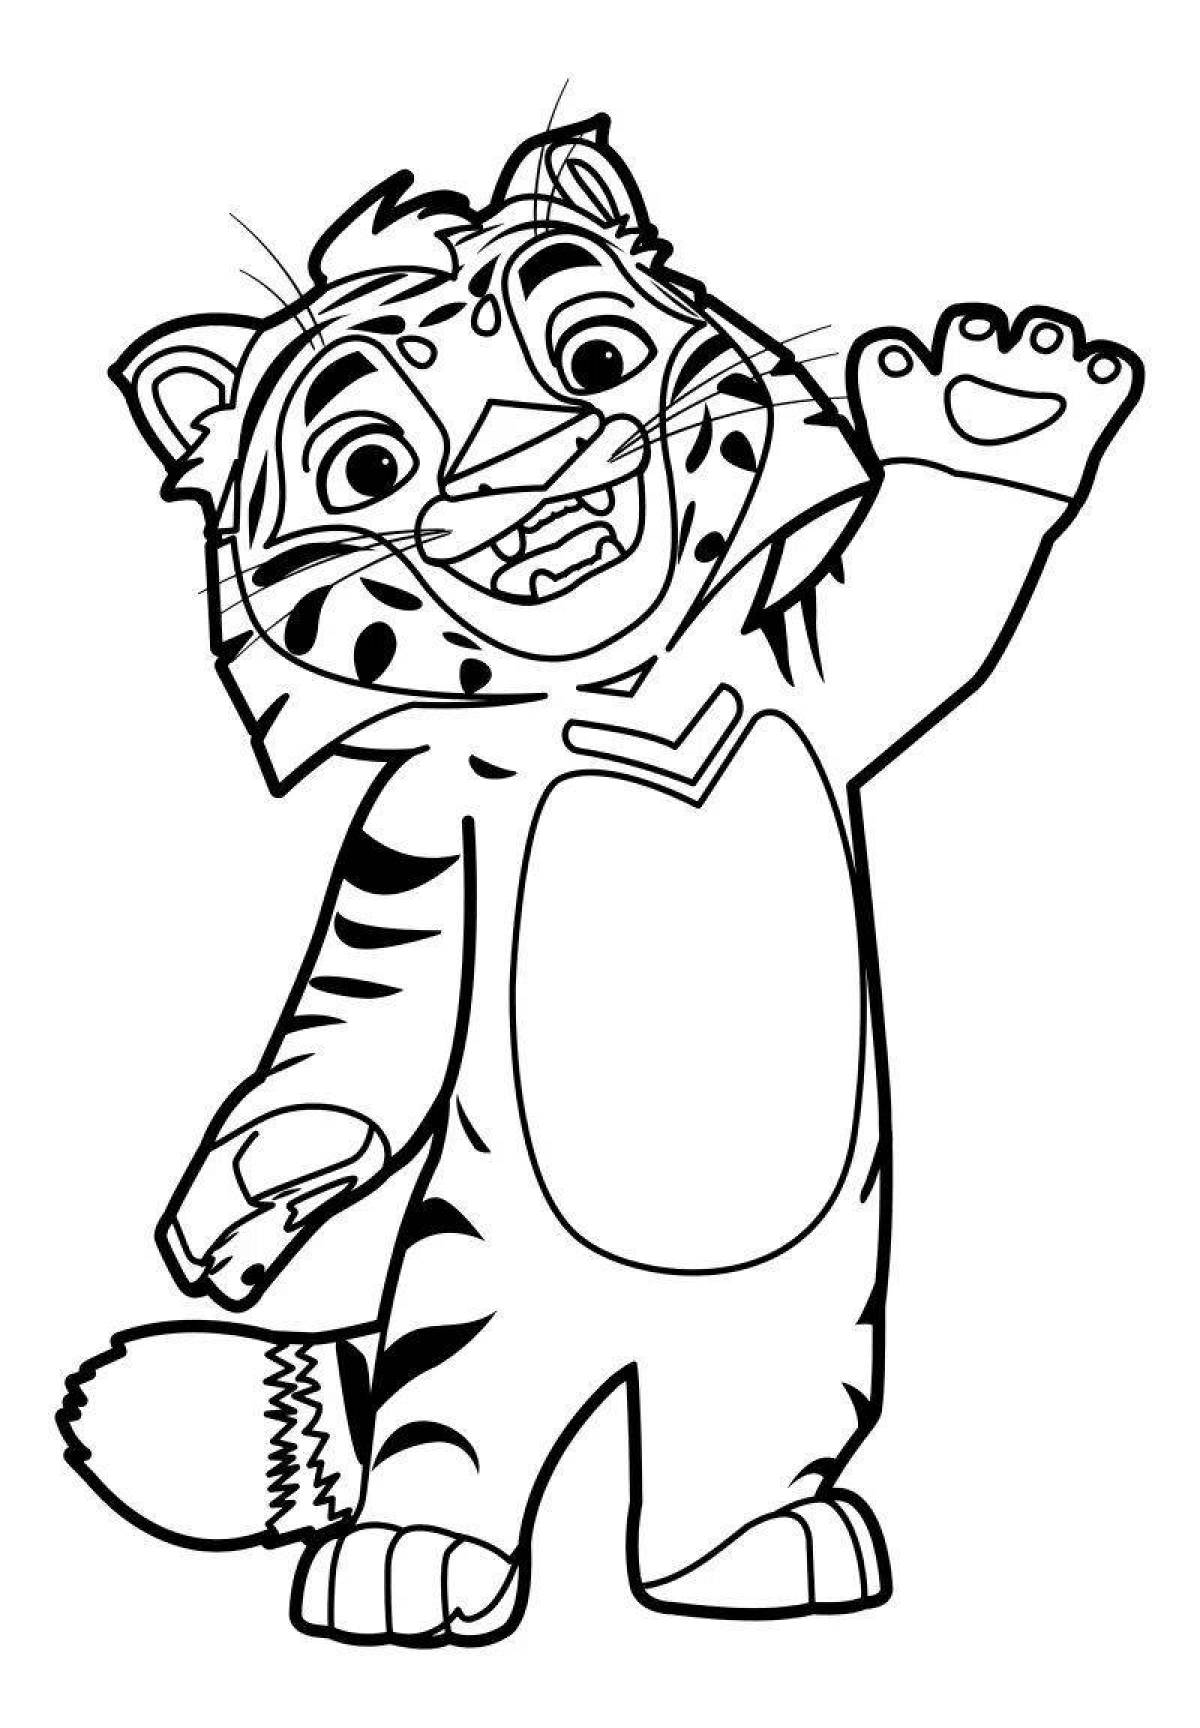 Outstanding tiger and lion coloring page for kids